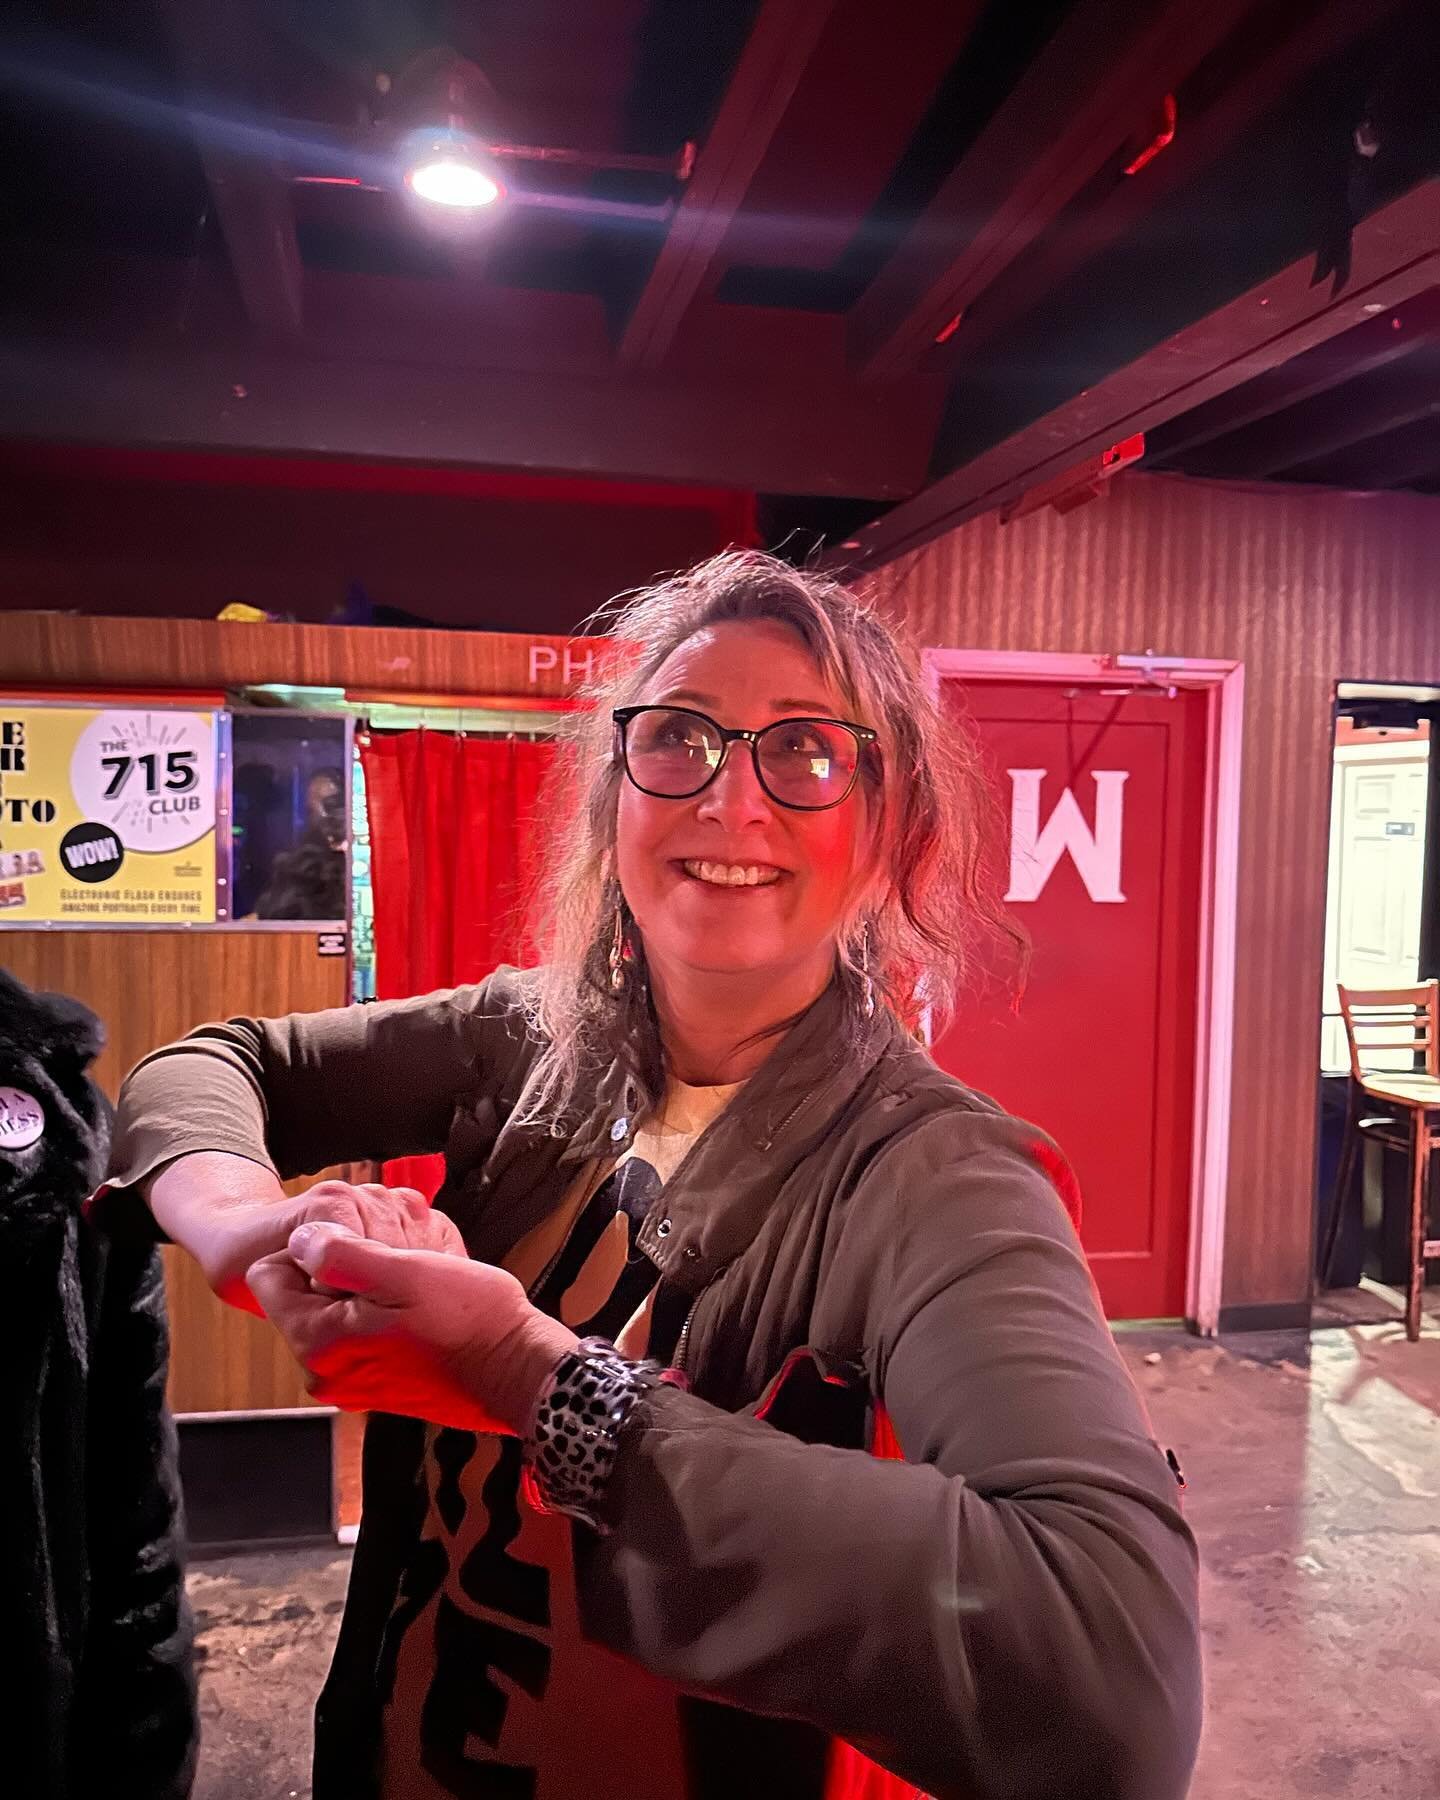 Shout out to the winners Laura (pictured), Charles and Andy for winning some tickets to go see @cssmusic at @marquisden on 5/11! Big thanks to @livenationco and @precious__blood &amp; @deejaylove303 for getting some fans connected with a rad show! St